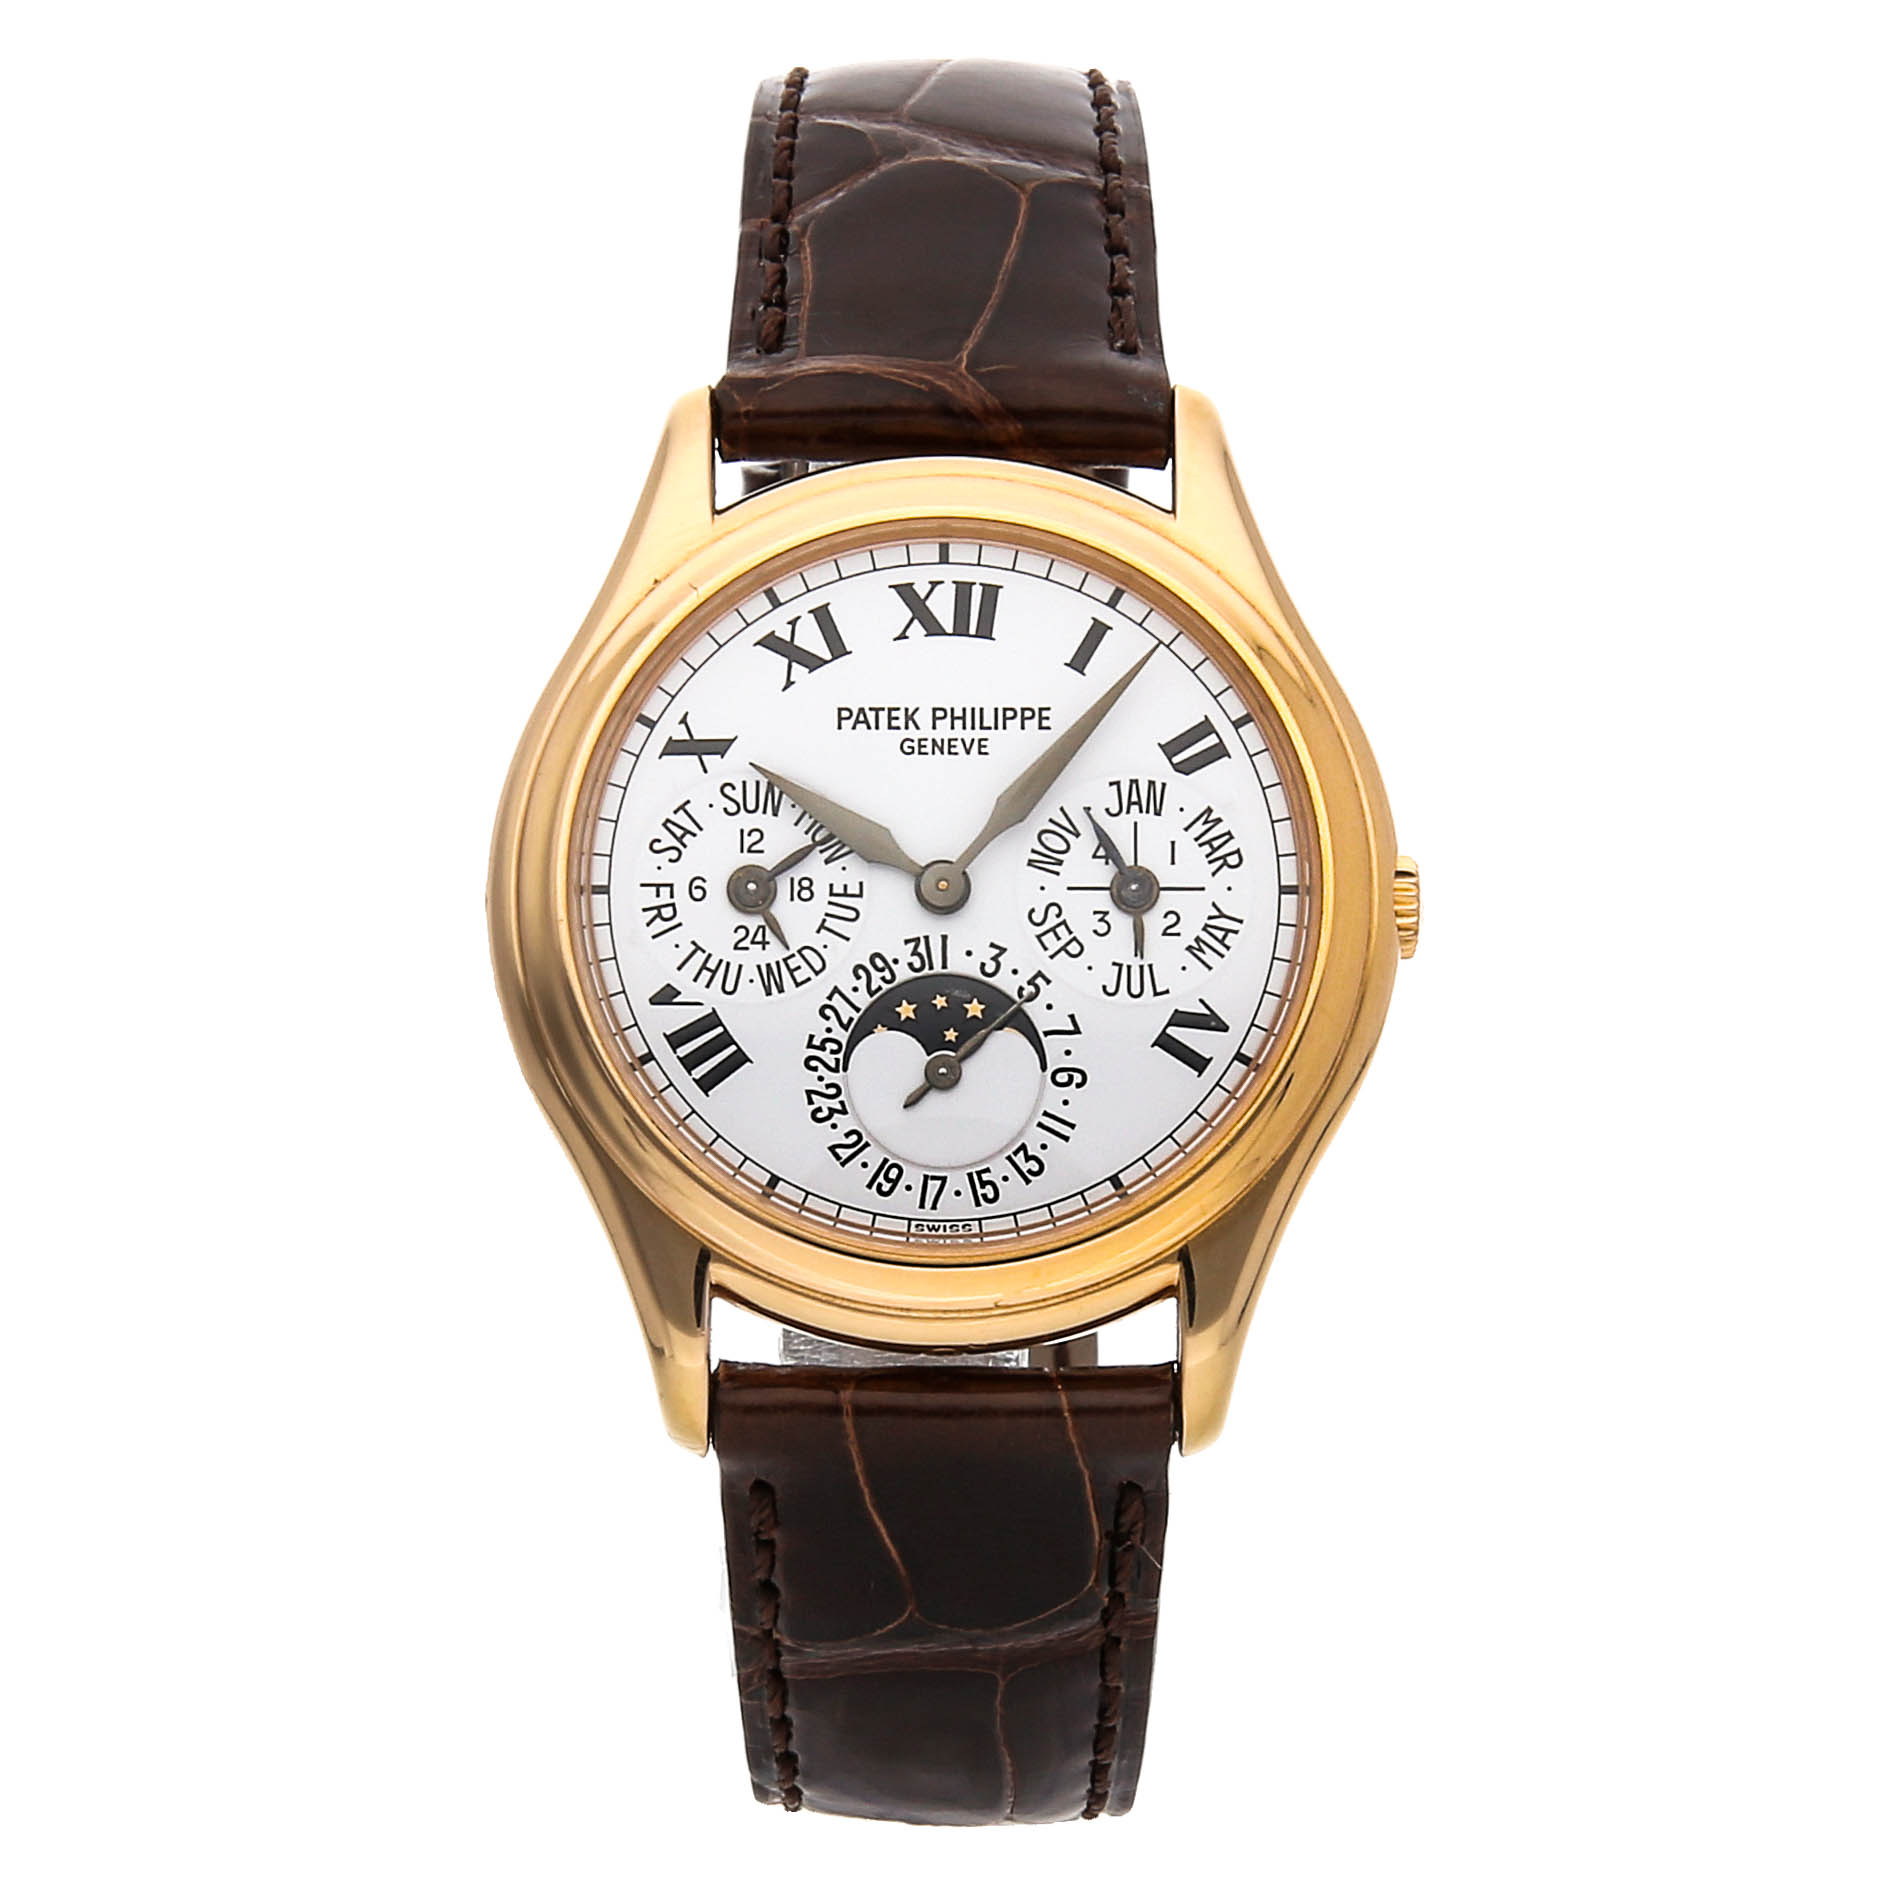 Perpetual Calendar 36mm Automatic in Rose Gold On Brown Alligator Leather Strap with White Dial